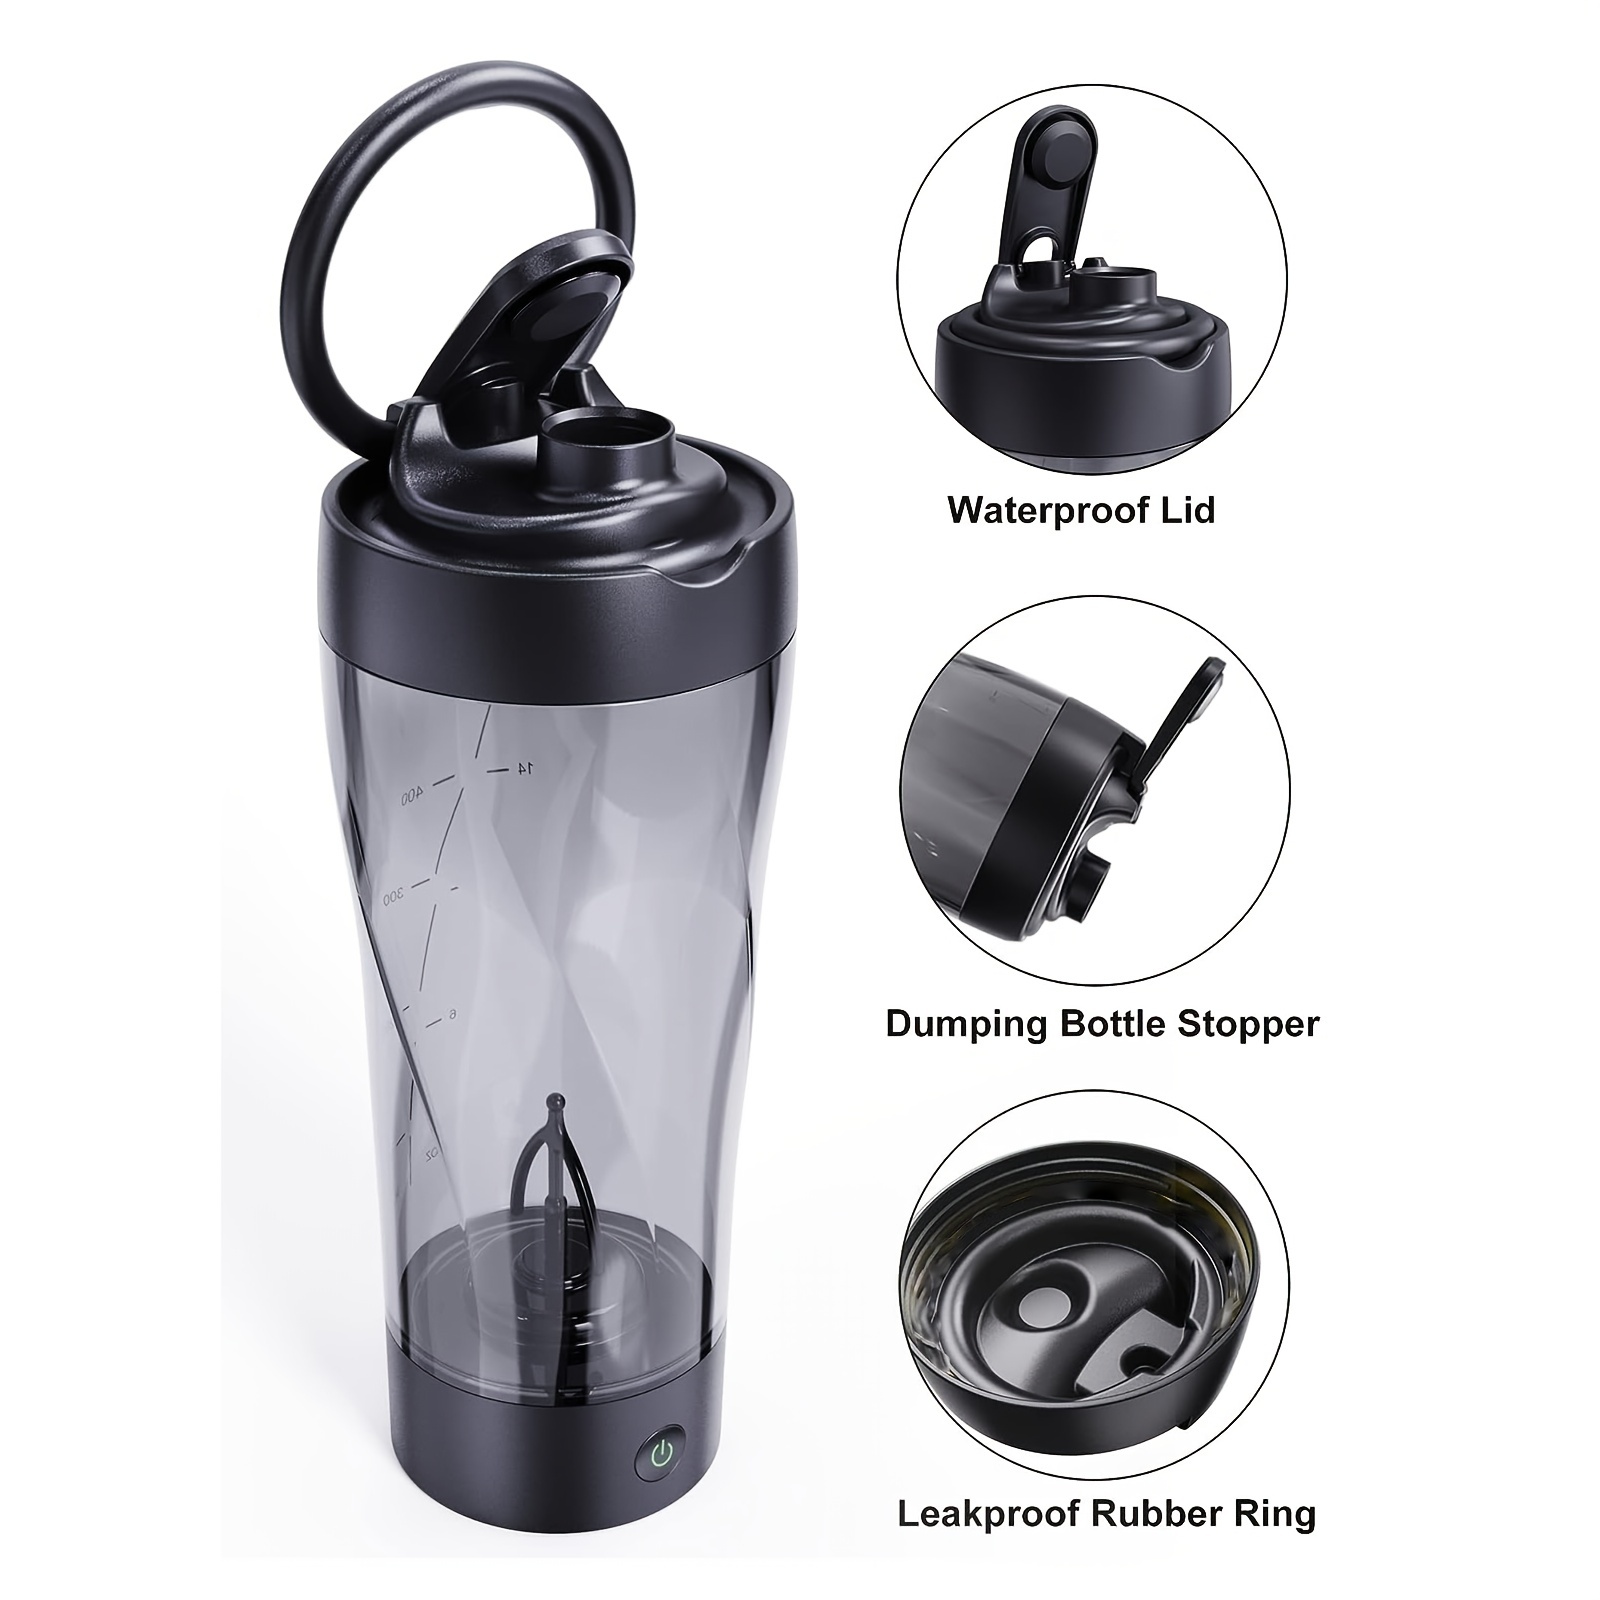 380mL Electric Protein Shaker Bottle Portable Mixer Cup Battery Powered  Coffee Shaker Cups Supplement Mixer for Gym Pre-Workout - AliExpress